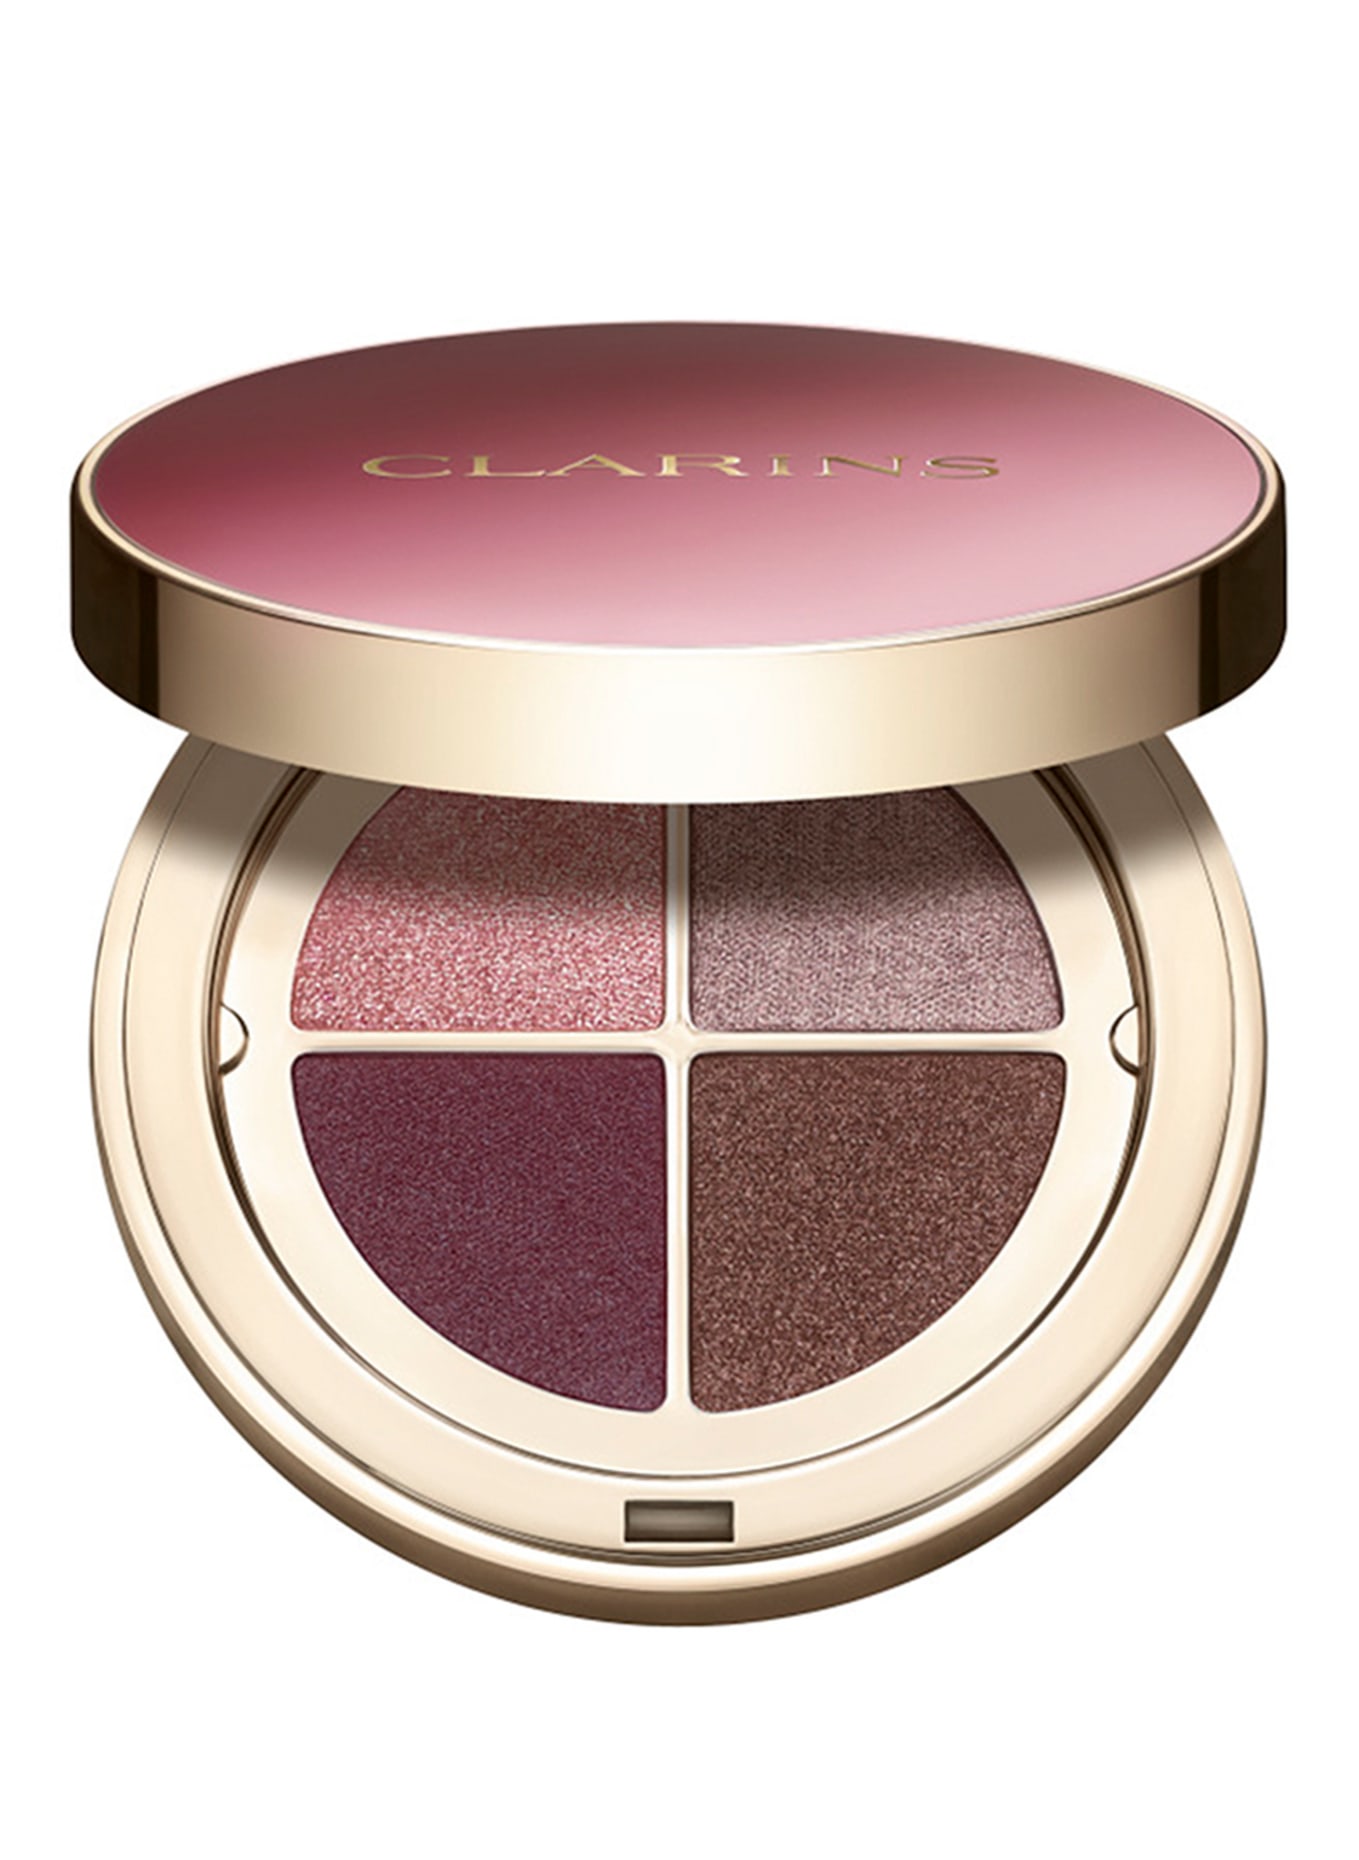 CLARINS OMBRE 4 COULEURS, Farbe: 02 ROSEWOOD GRADATION (Bild 1)